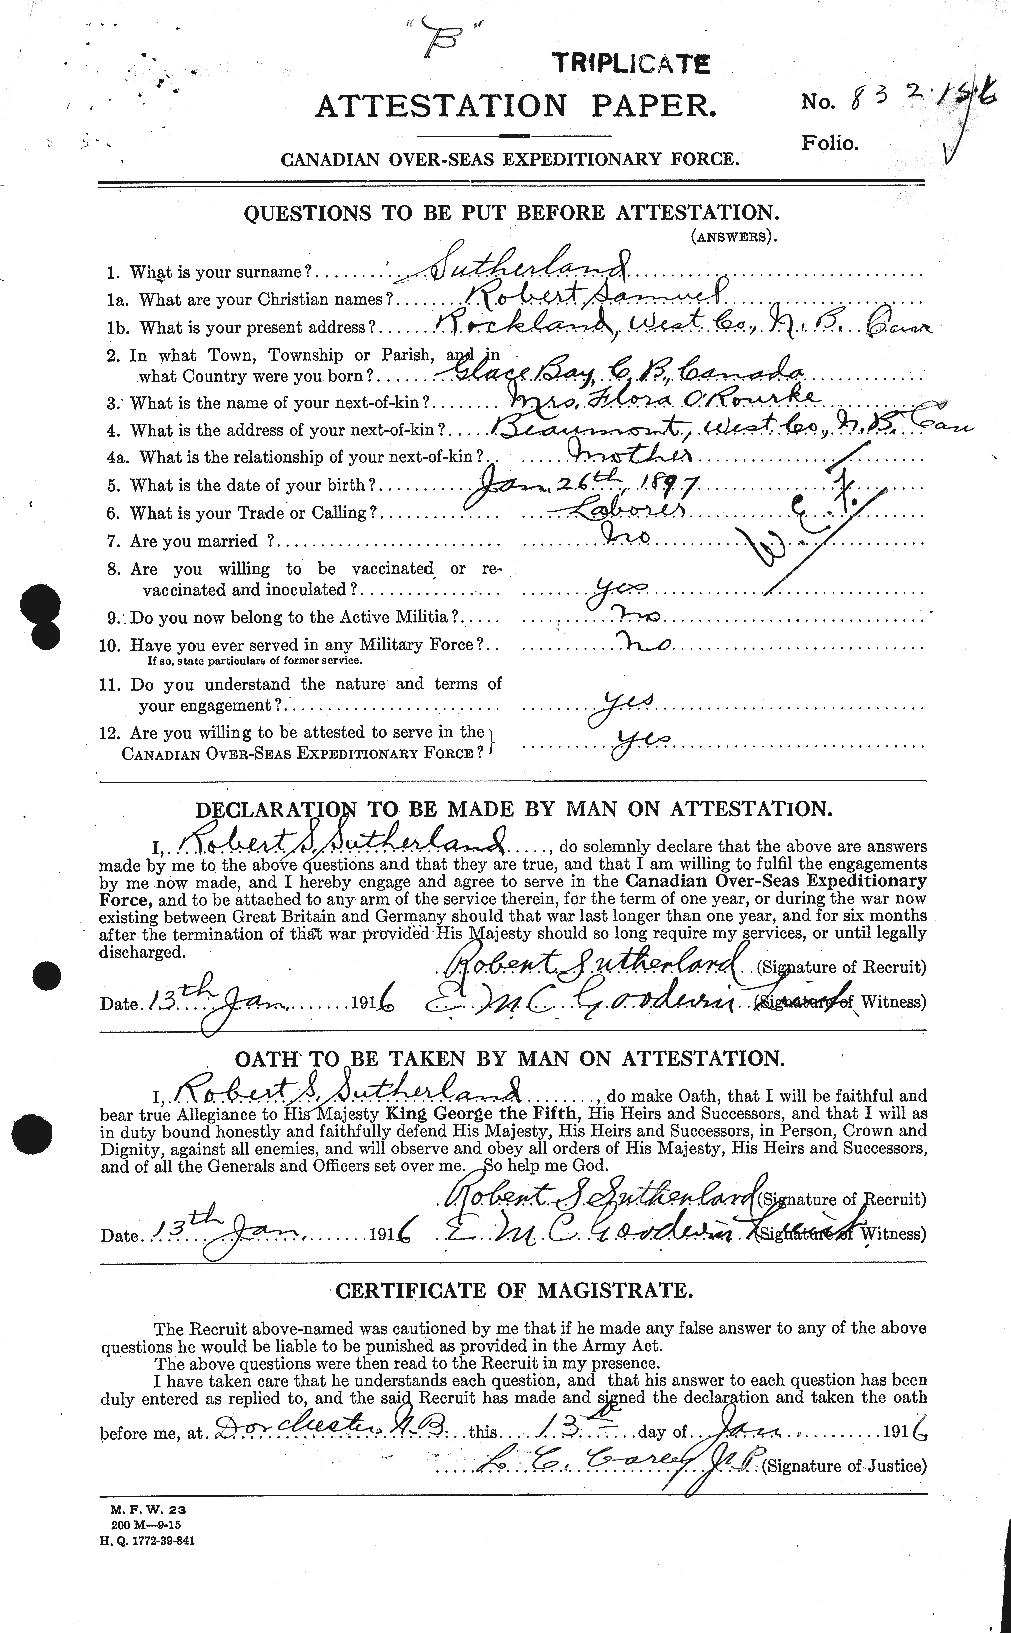 Personnel Records of the First World War - CEF 126786a